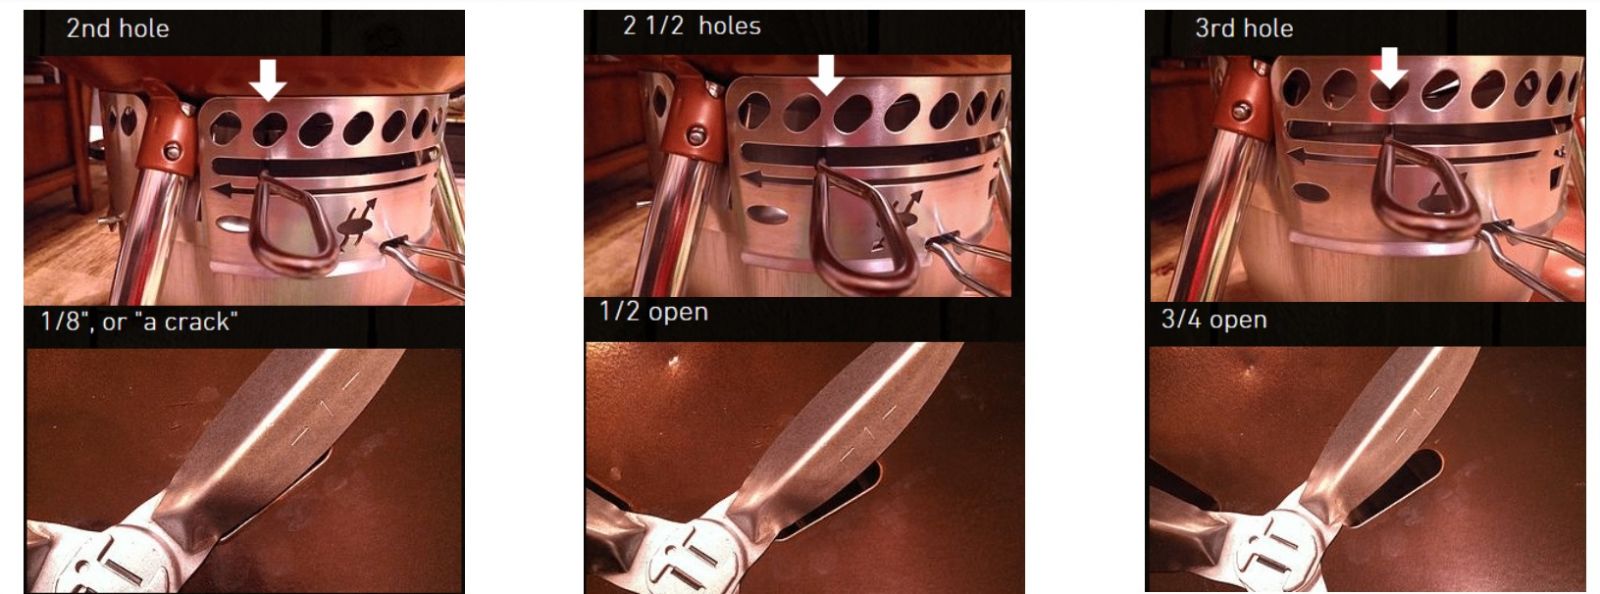 This is an image to be used as a guide showing the air gap on the different vent positions of the weber kettle. 